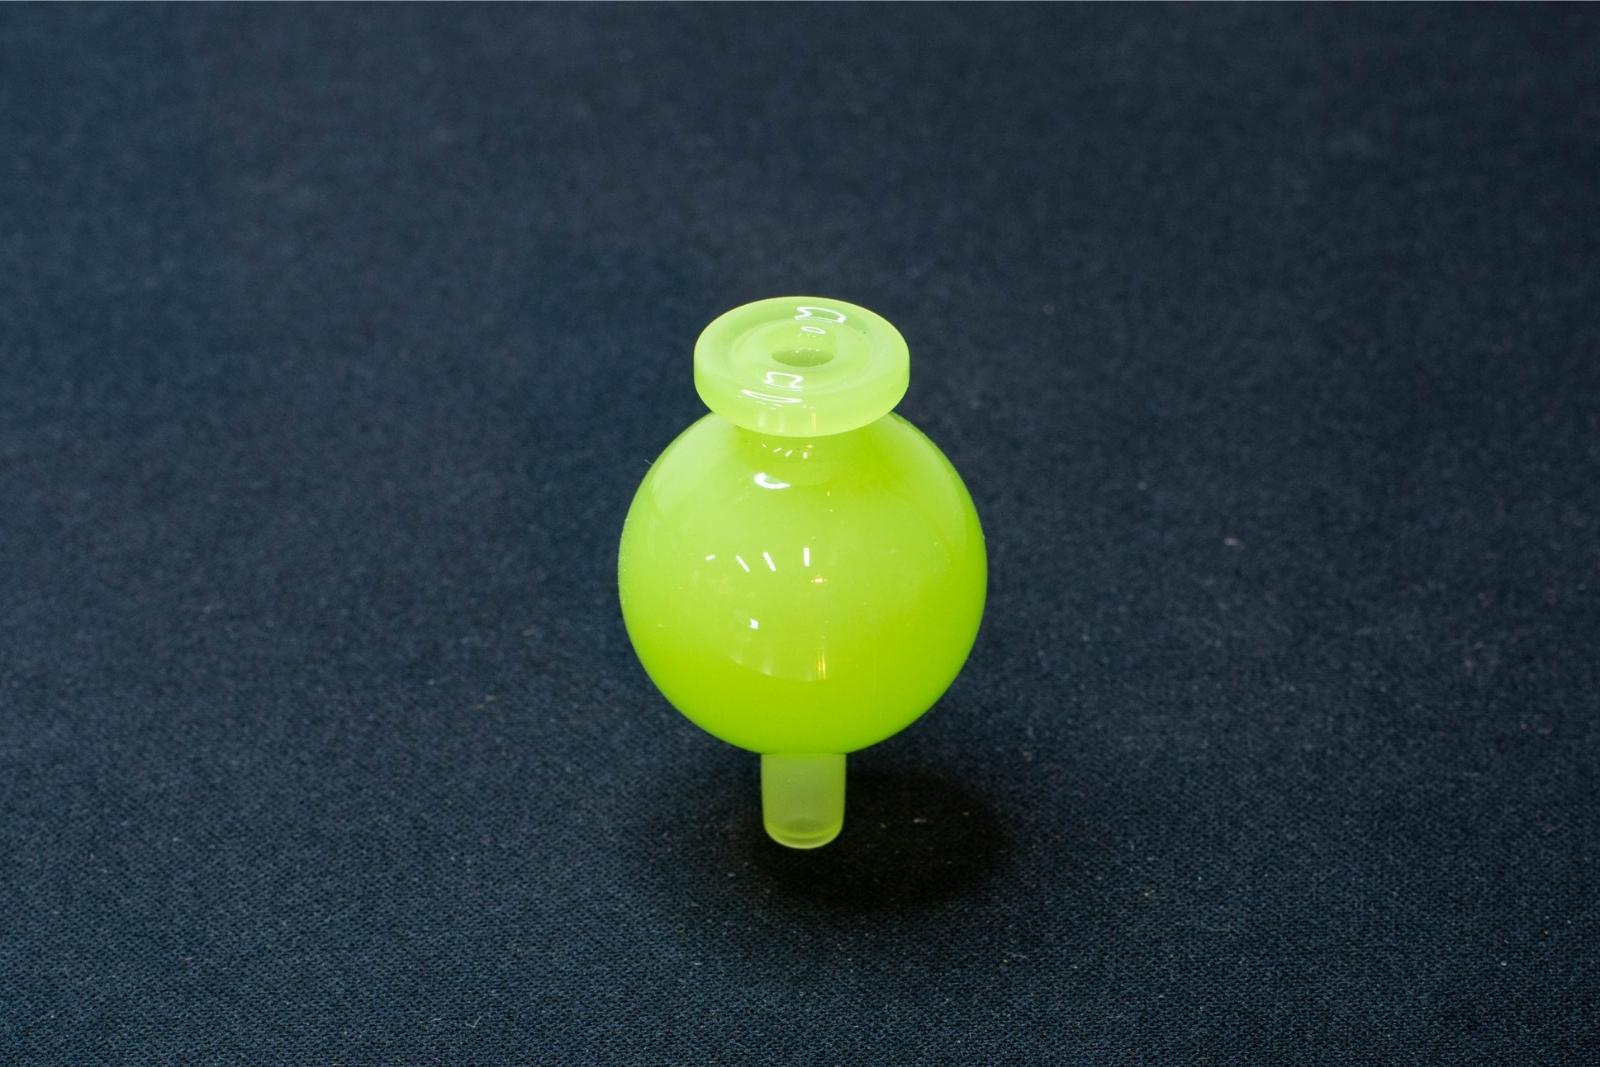 A light green bubble cap made by BorOregon, on a black background